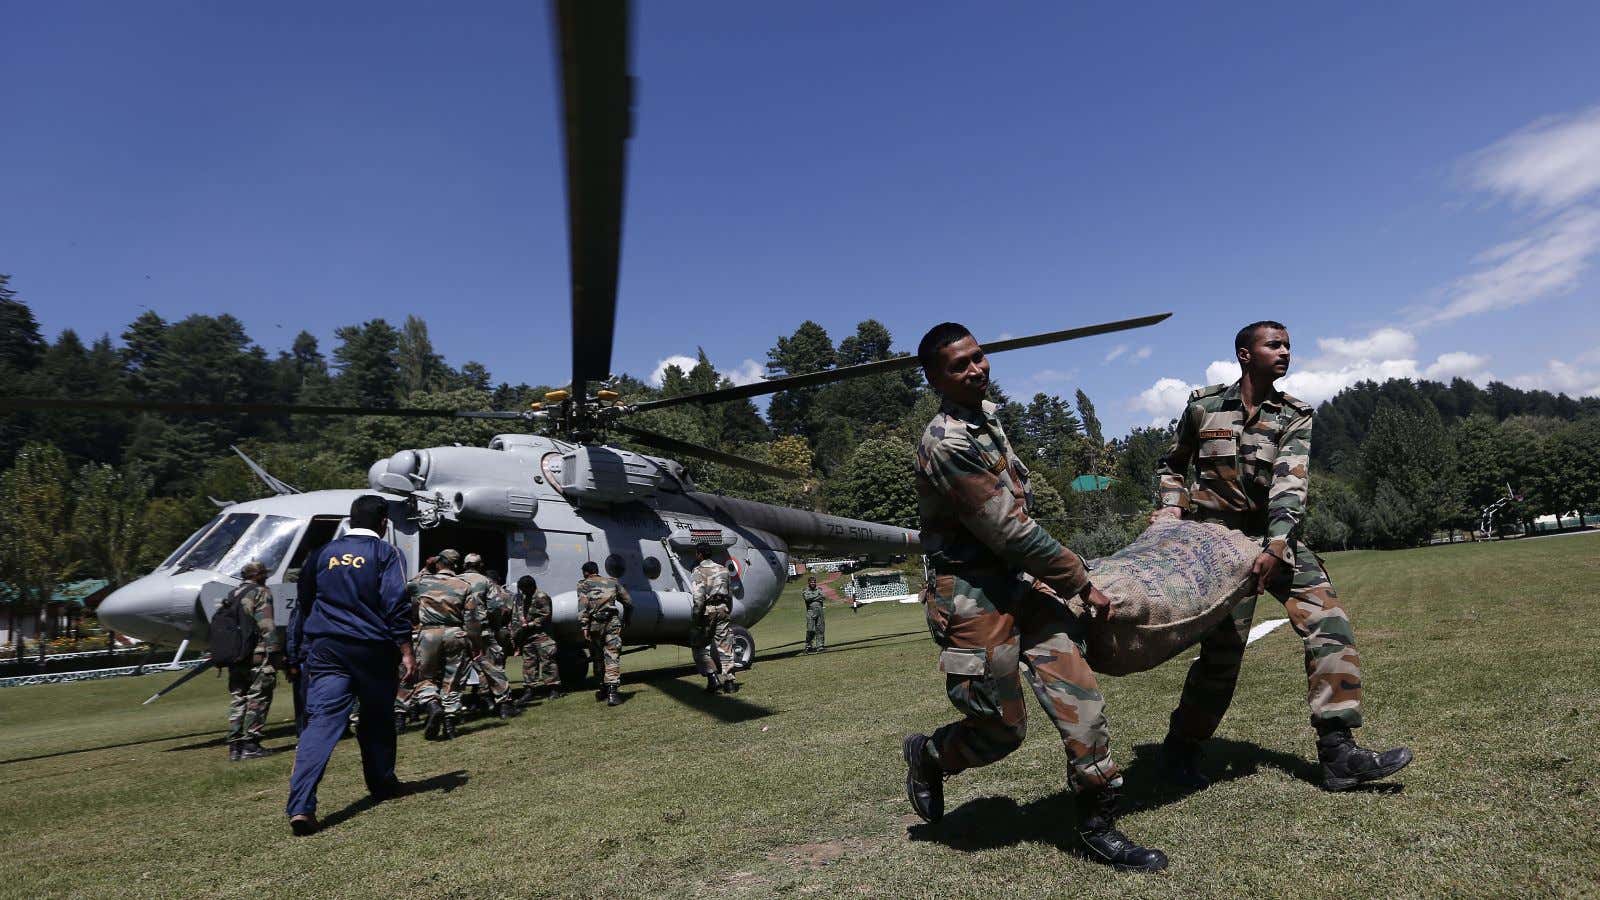 The Indian Air Force has airdropped over 3,500 tonnes of relief materials into Jammu and Kashmir